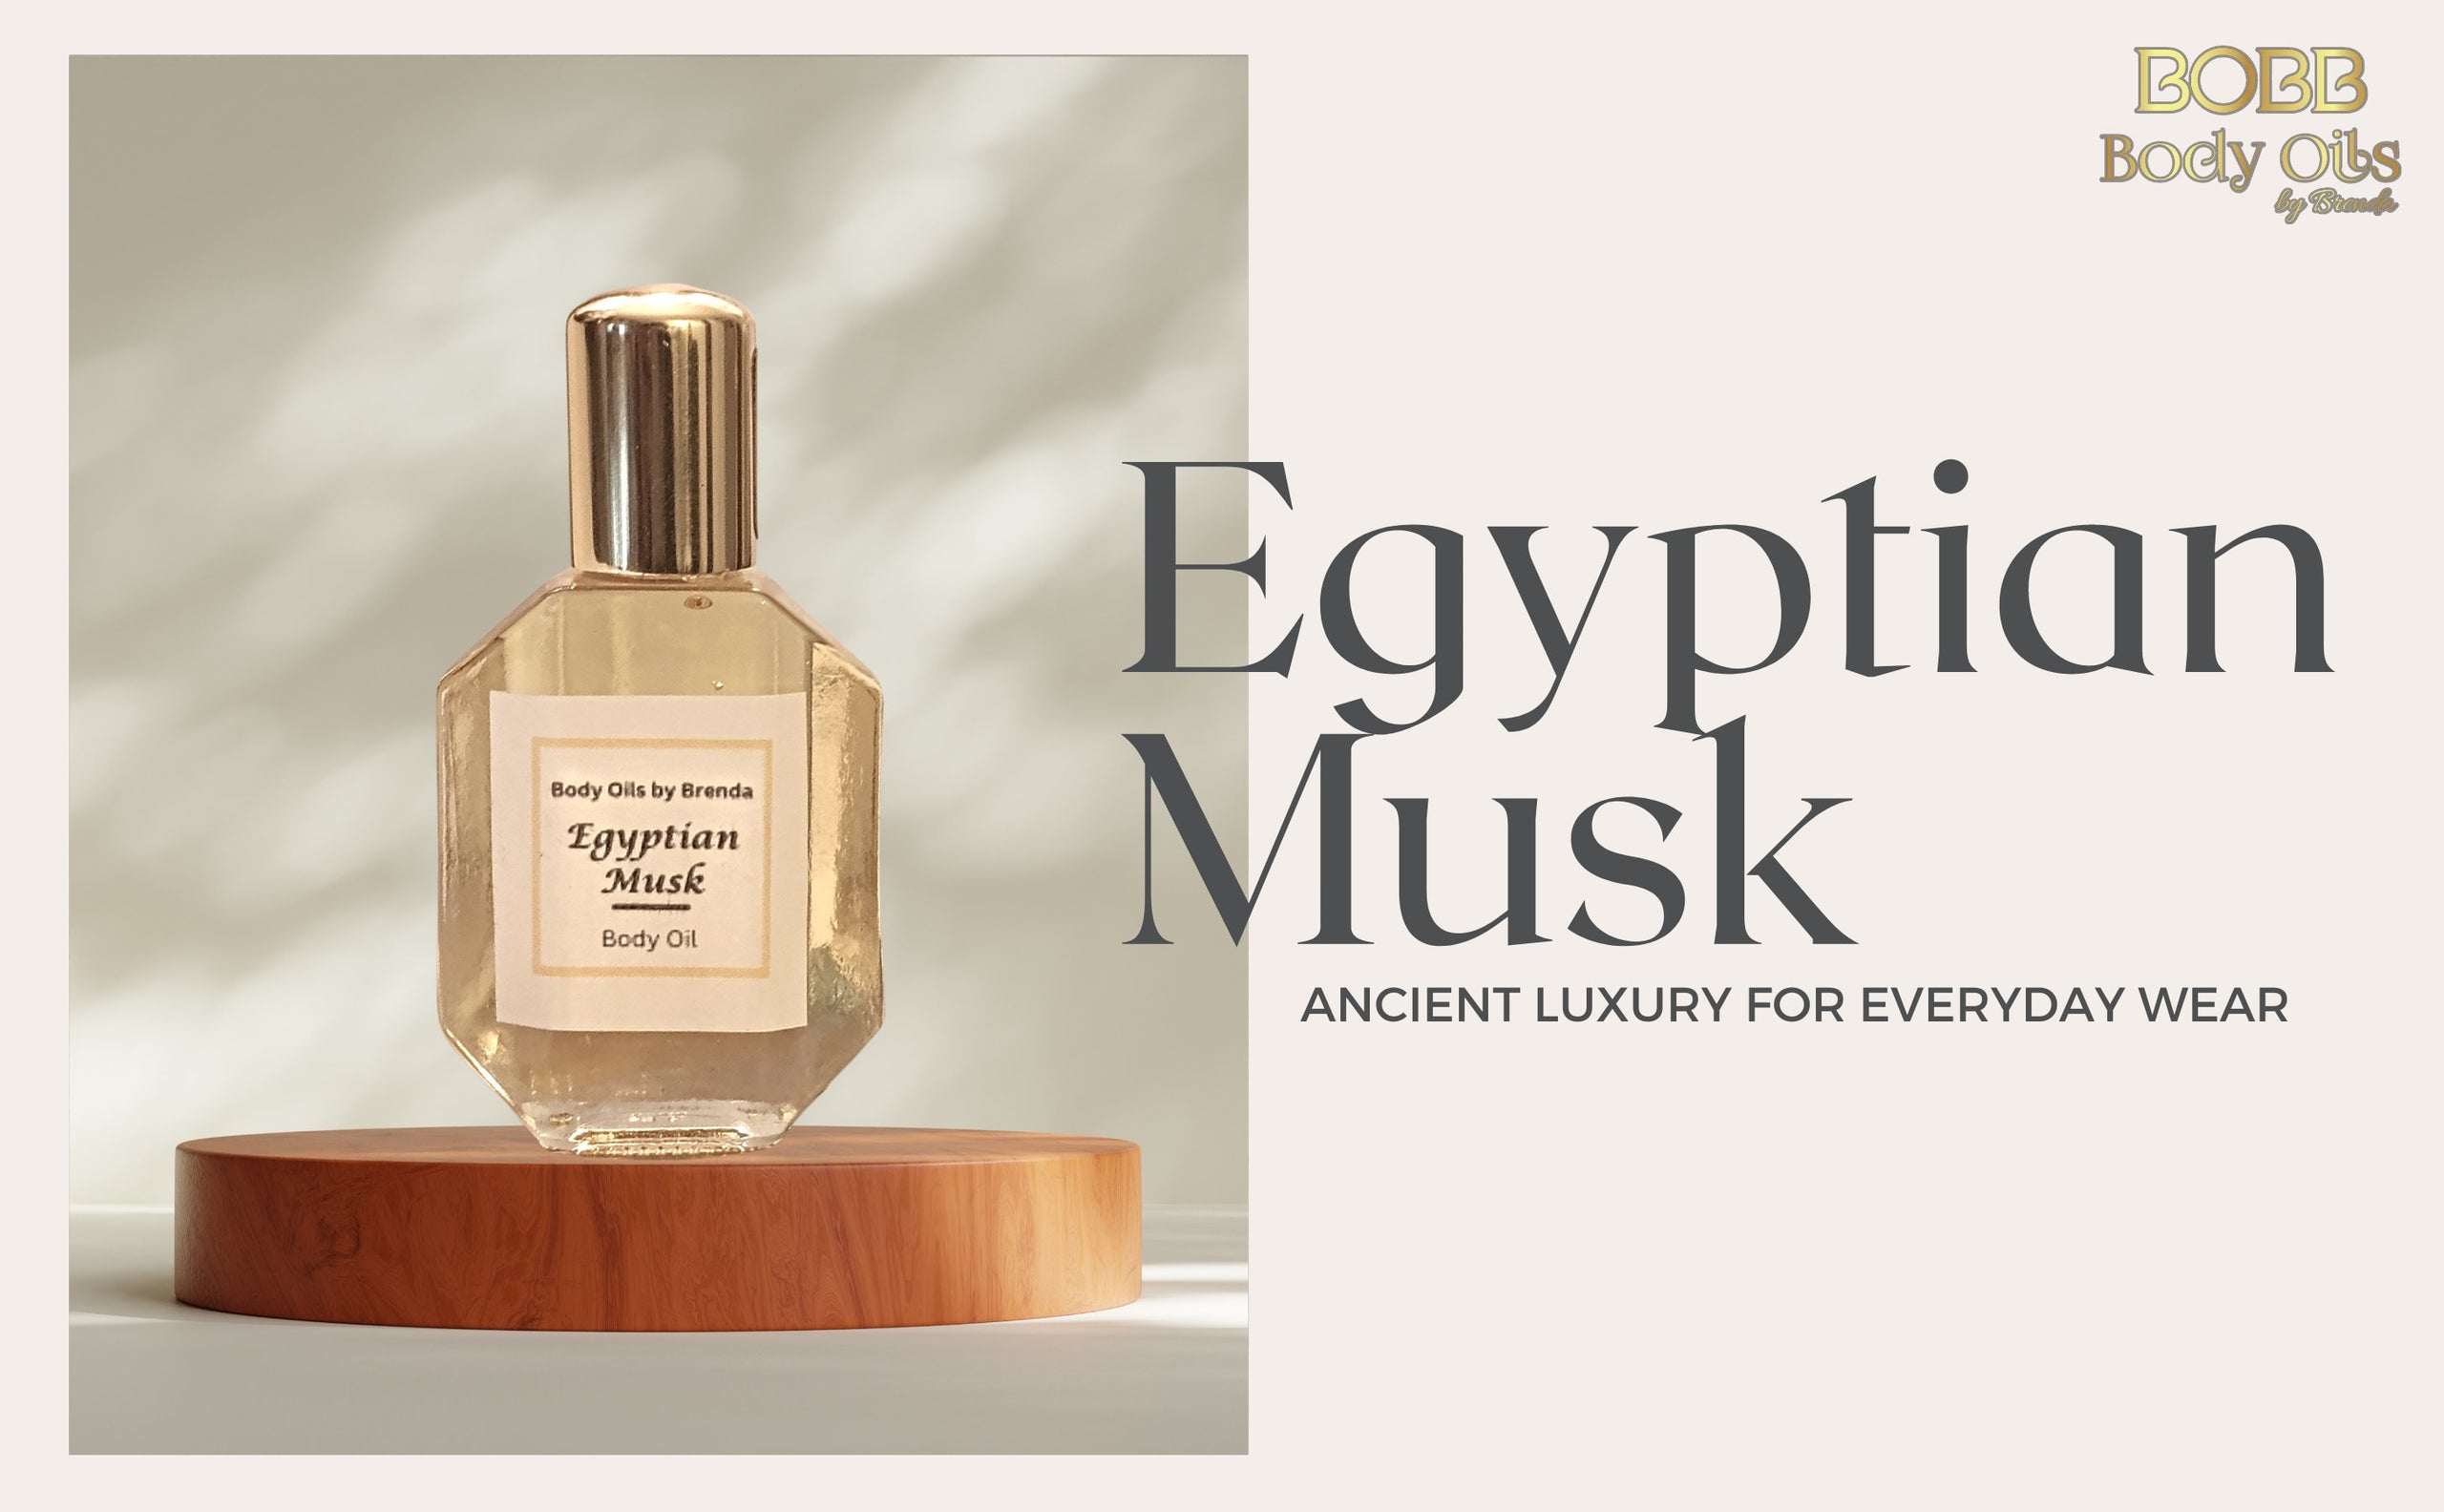 Egyptian Musk Pure Thick Uncut Body Oil. Buy 2 Get 1 FREE, Alcohol Free,  Unisex, All Natural